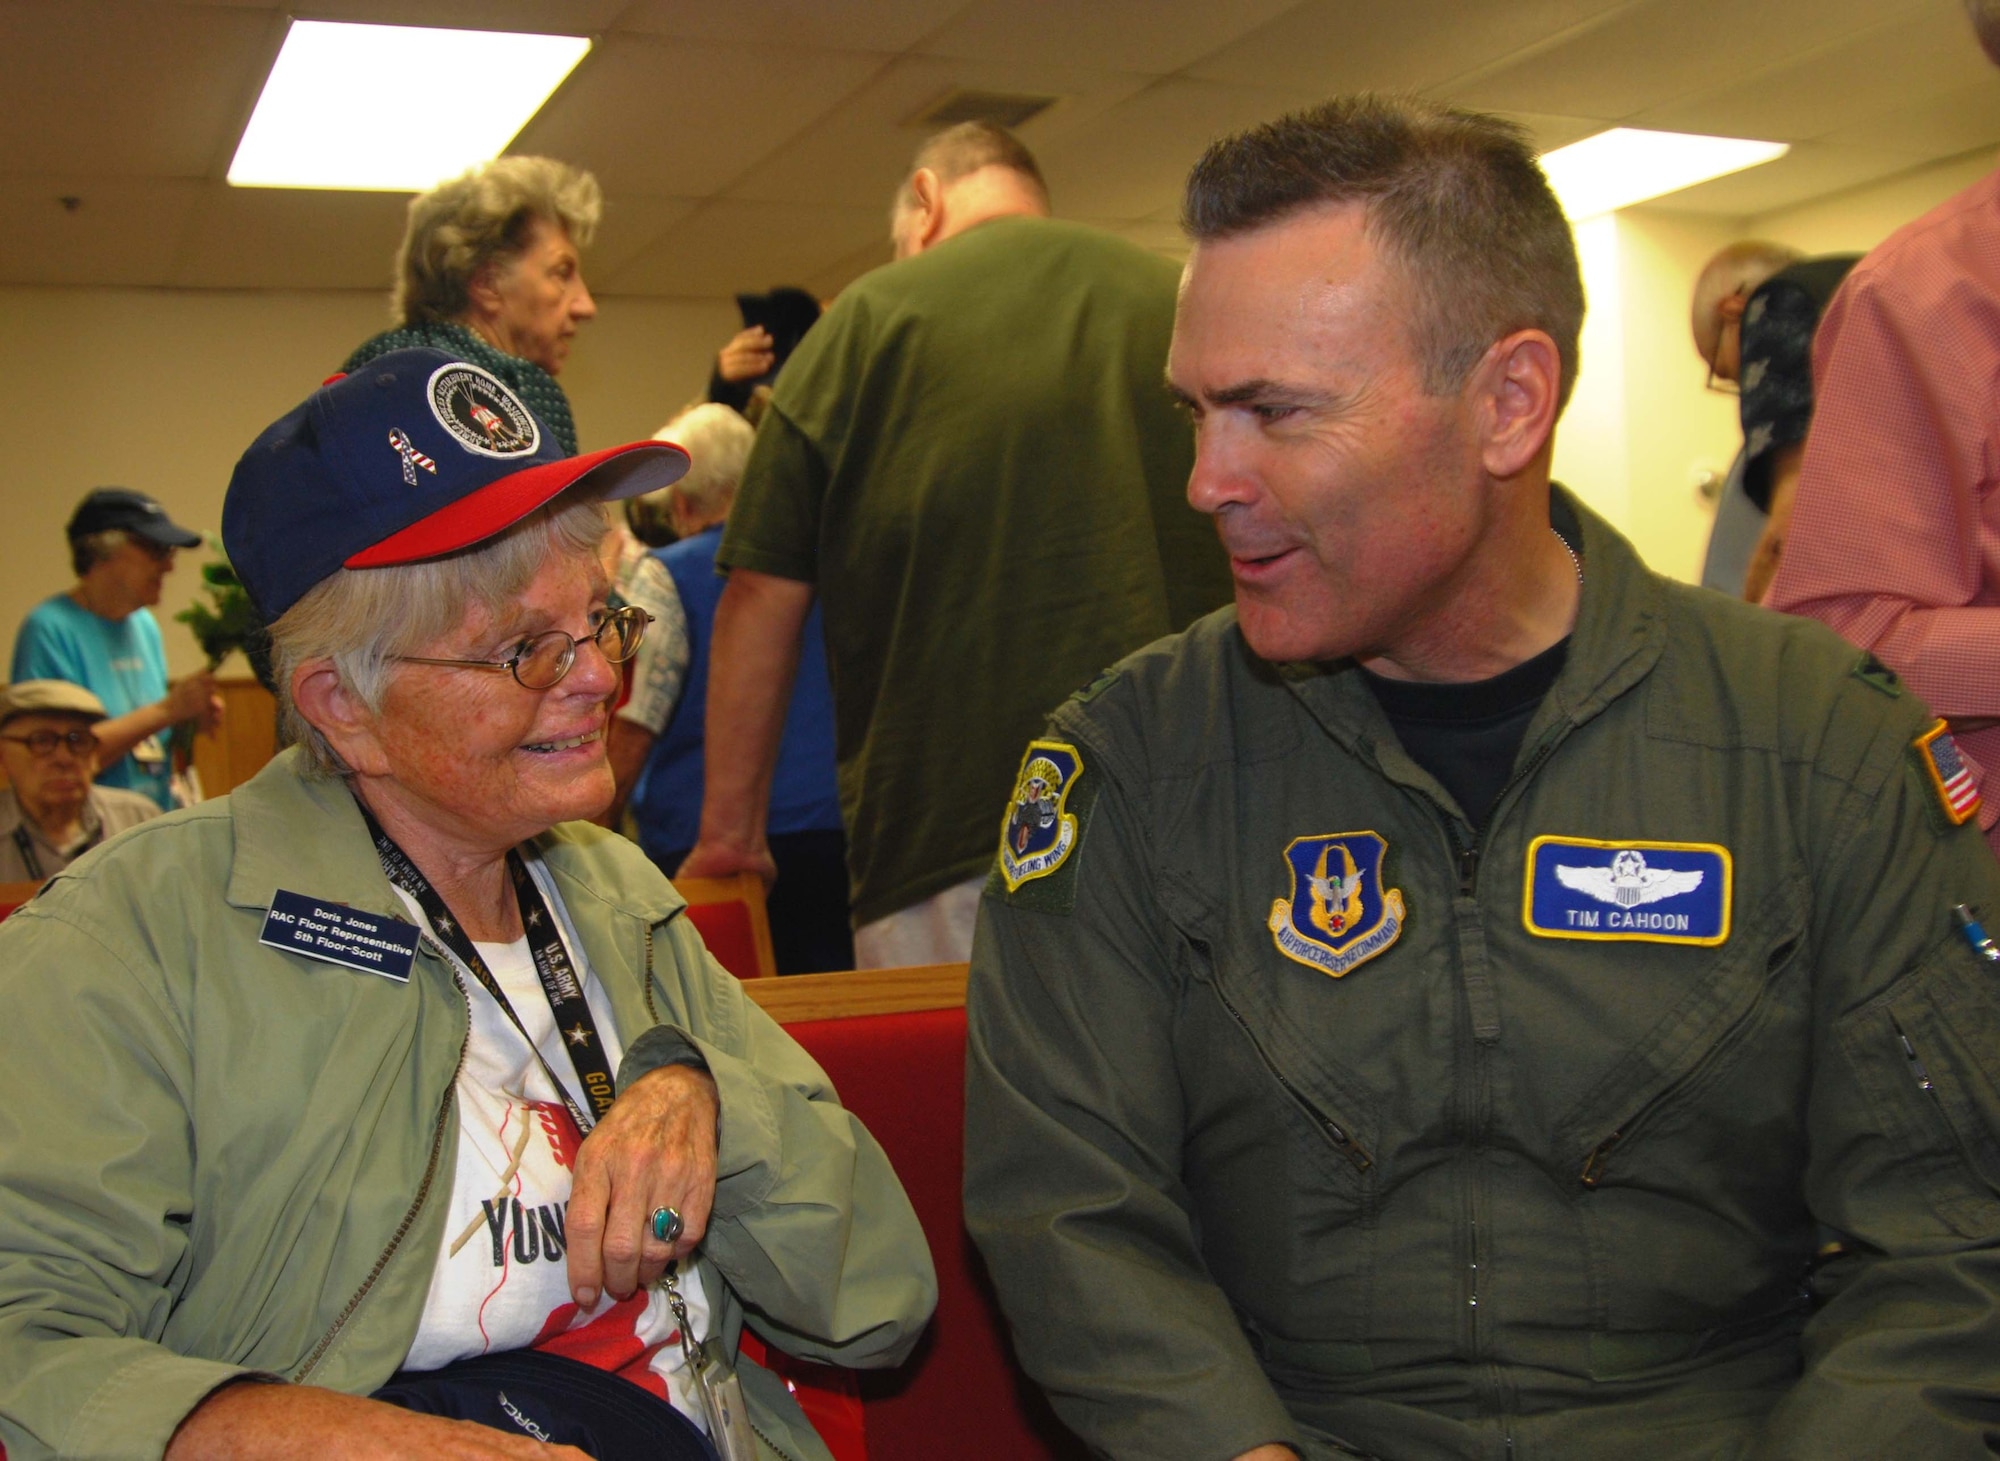 Colonel Tim Cahoon, commander of the 459th Air Refueling Wing, visits with a resident of the Armed Forces Retirement Home-Washington. Members of the 459th ARW spent the afternoon visiting the AFRH-W in honor of Veterans Day and took a tour of the campus which includes a chapel, convenience store, a 600 seat theatre, post office, library, and a 9-hole golf course.  (U.S. Air Force Photo/Senior Airman Sasha S. Skrine)


